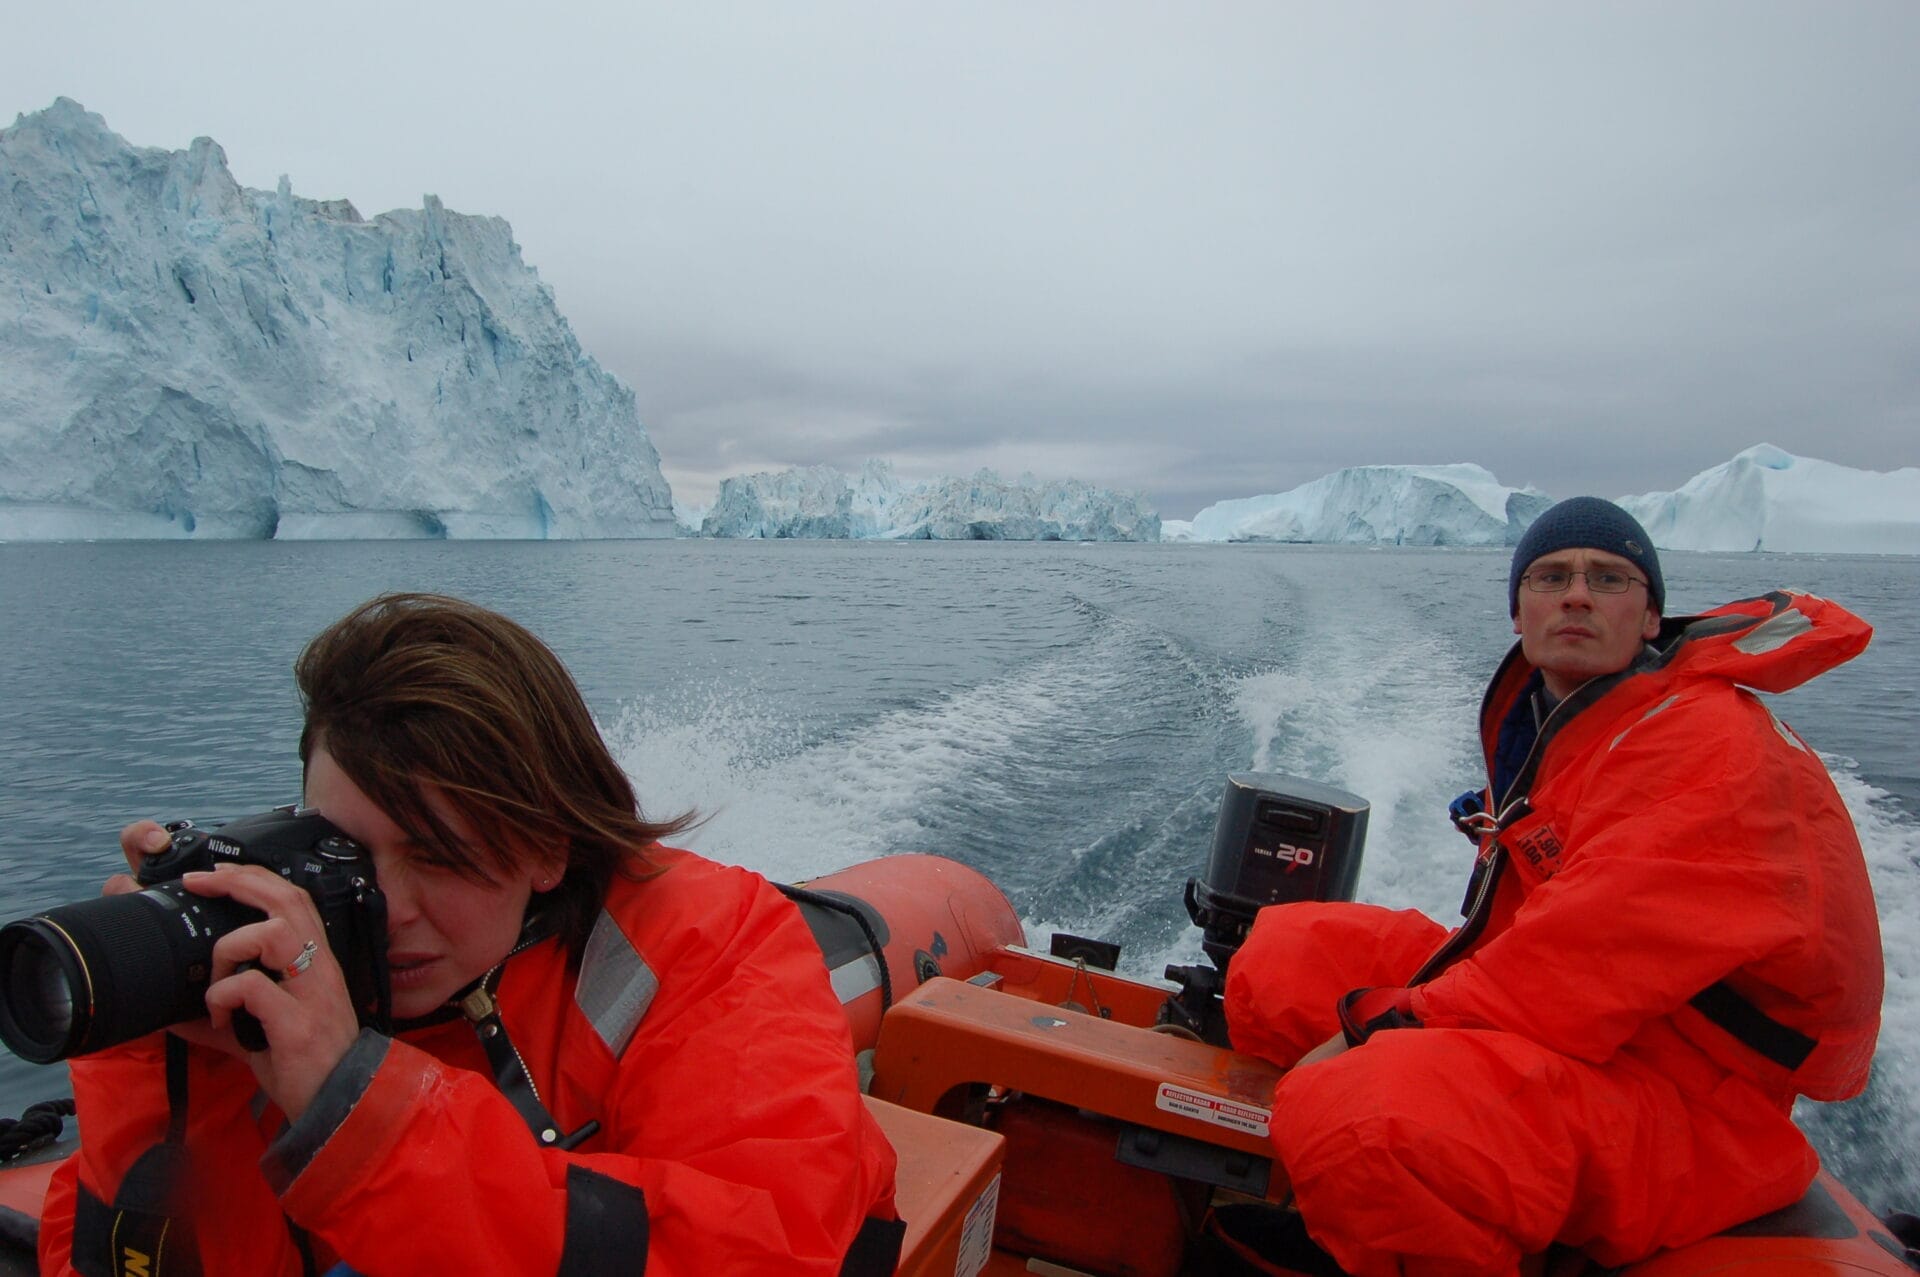 Photograph of the monitoring crew on a boat in the ocean surrounded by icebergs.